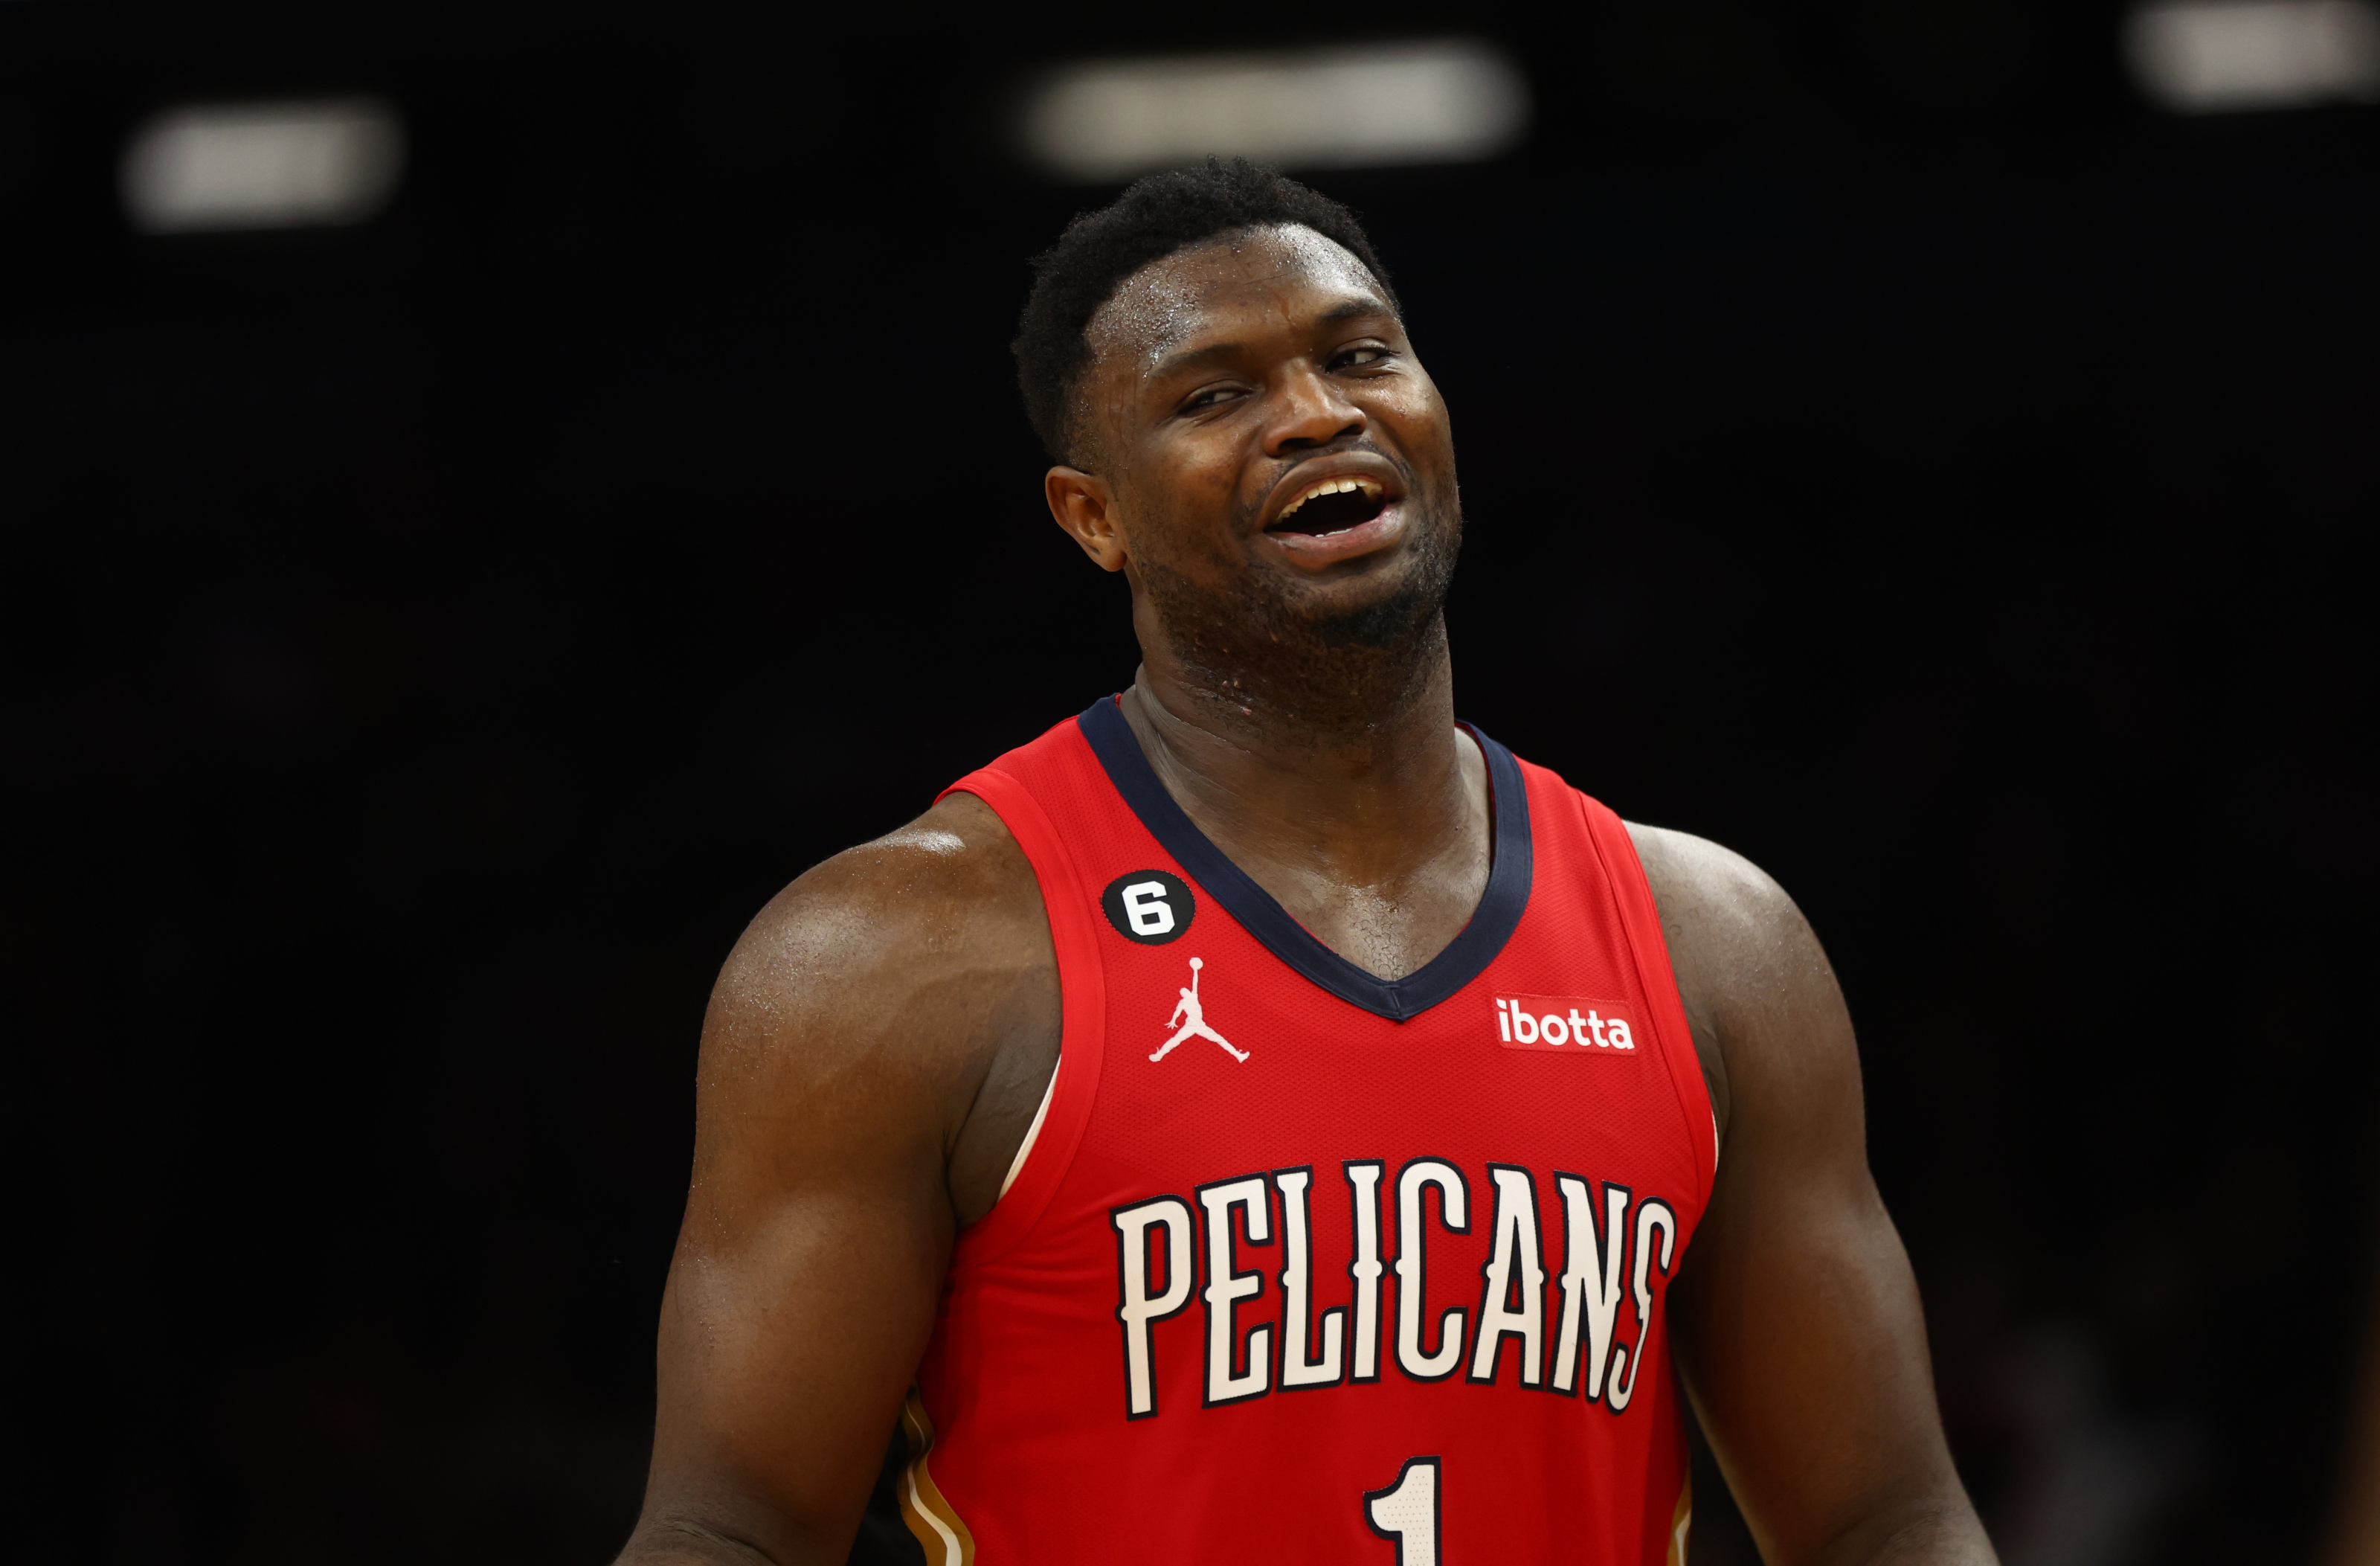 Zion Williamson has been in the NBA for 3 seasons now, but has